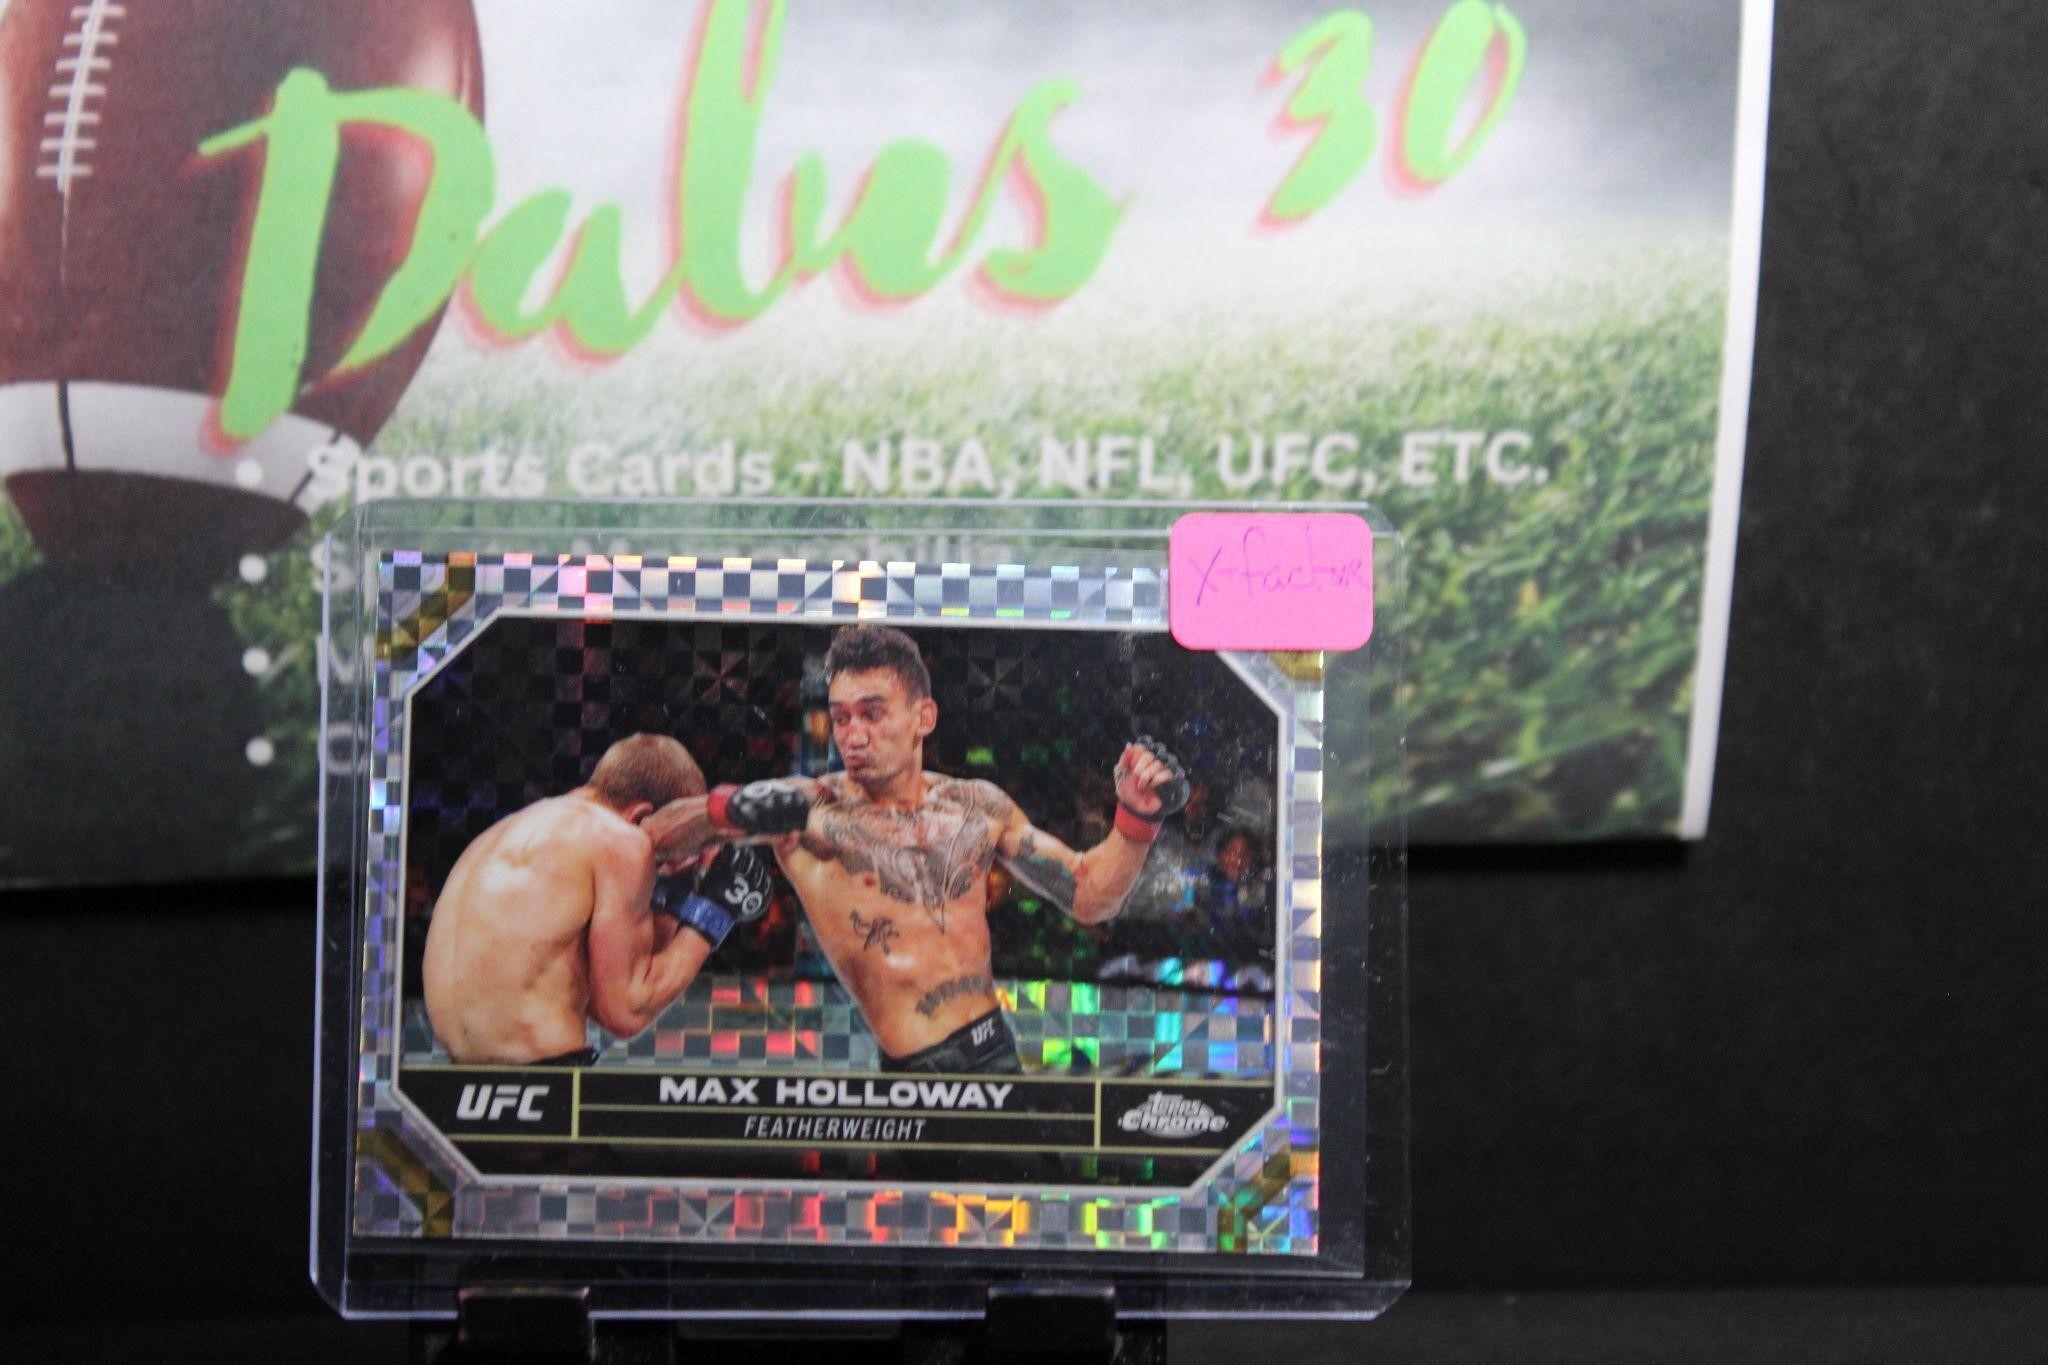 Dalus30 Sports Trading Cards 5/14-5/21